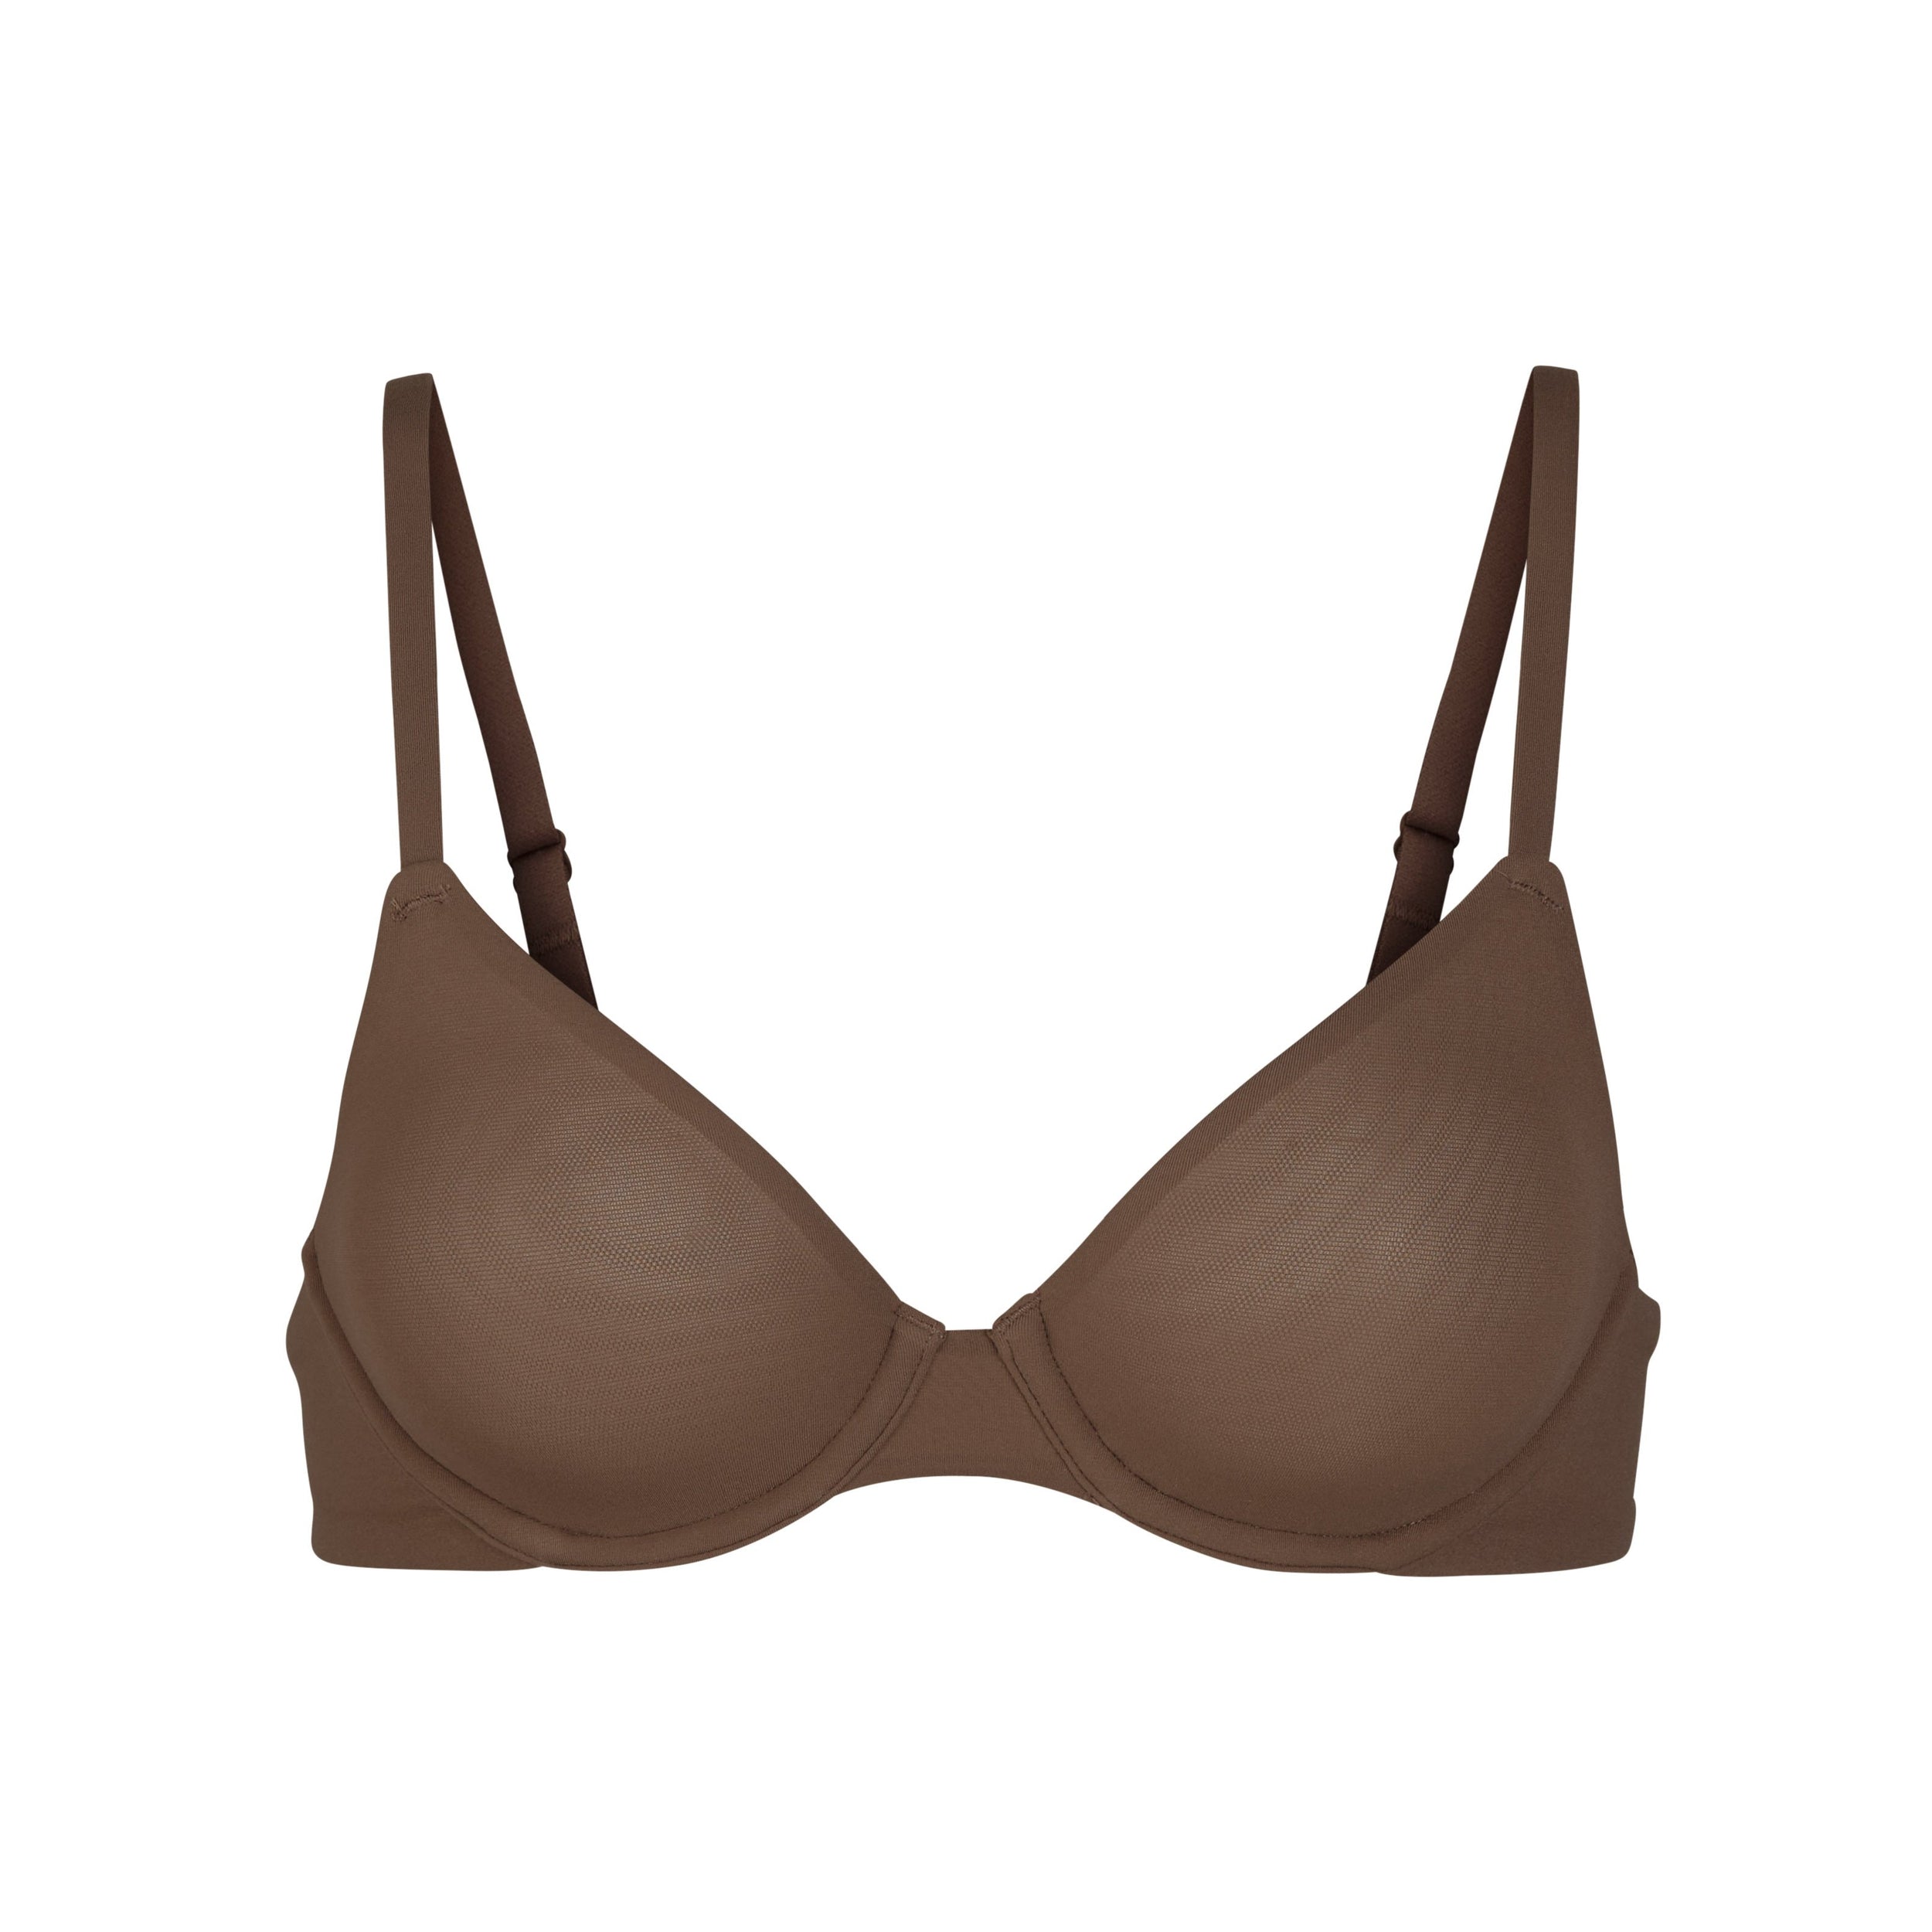 SKIMS Fits Everybody Push-Up Bra 36A NWT Tan Size 36 A - $35 (32% Off  Retail) New With Tags - From Ali